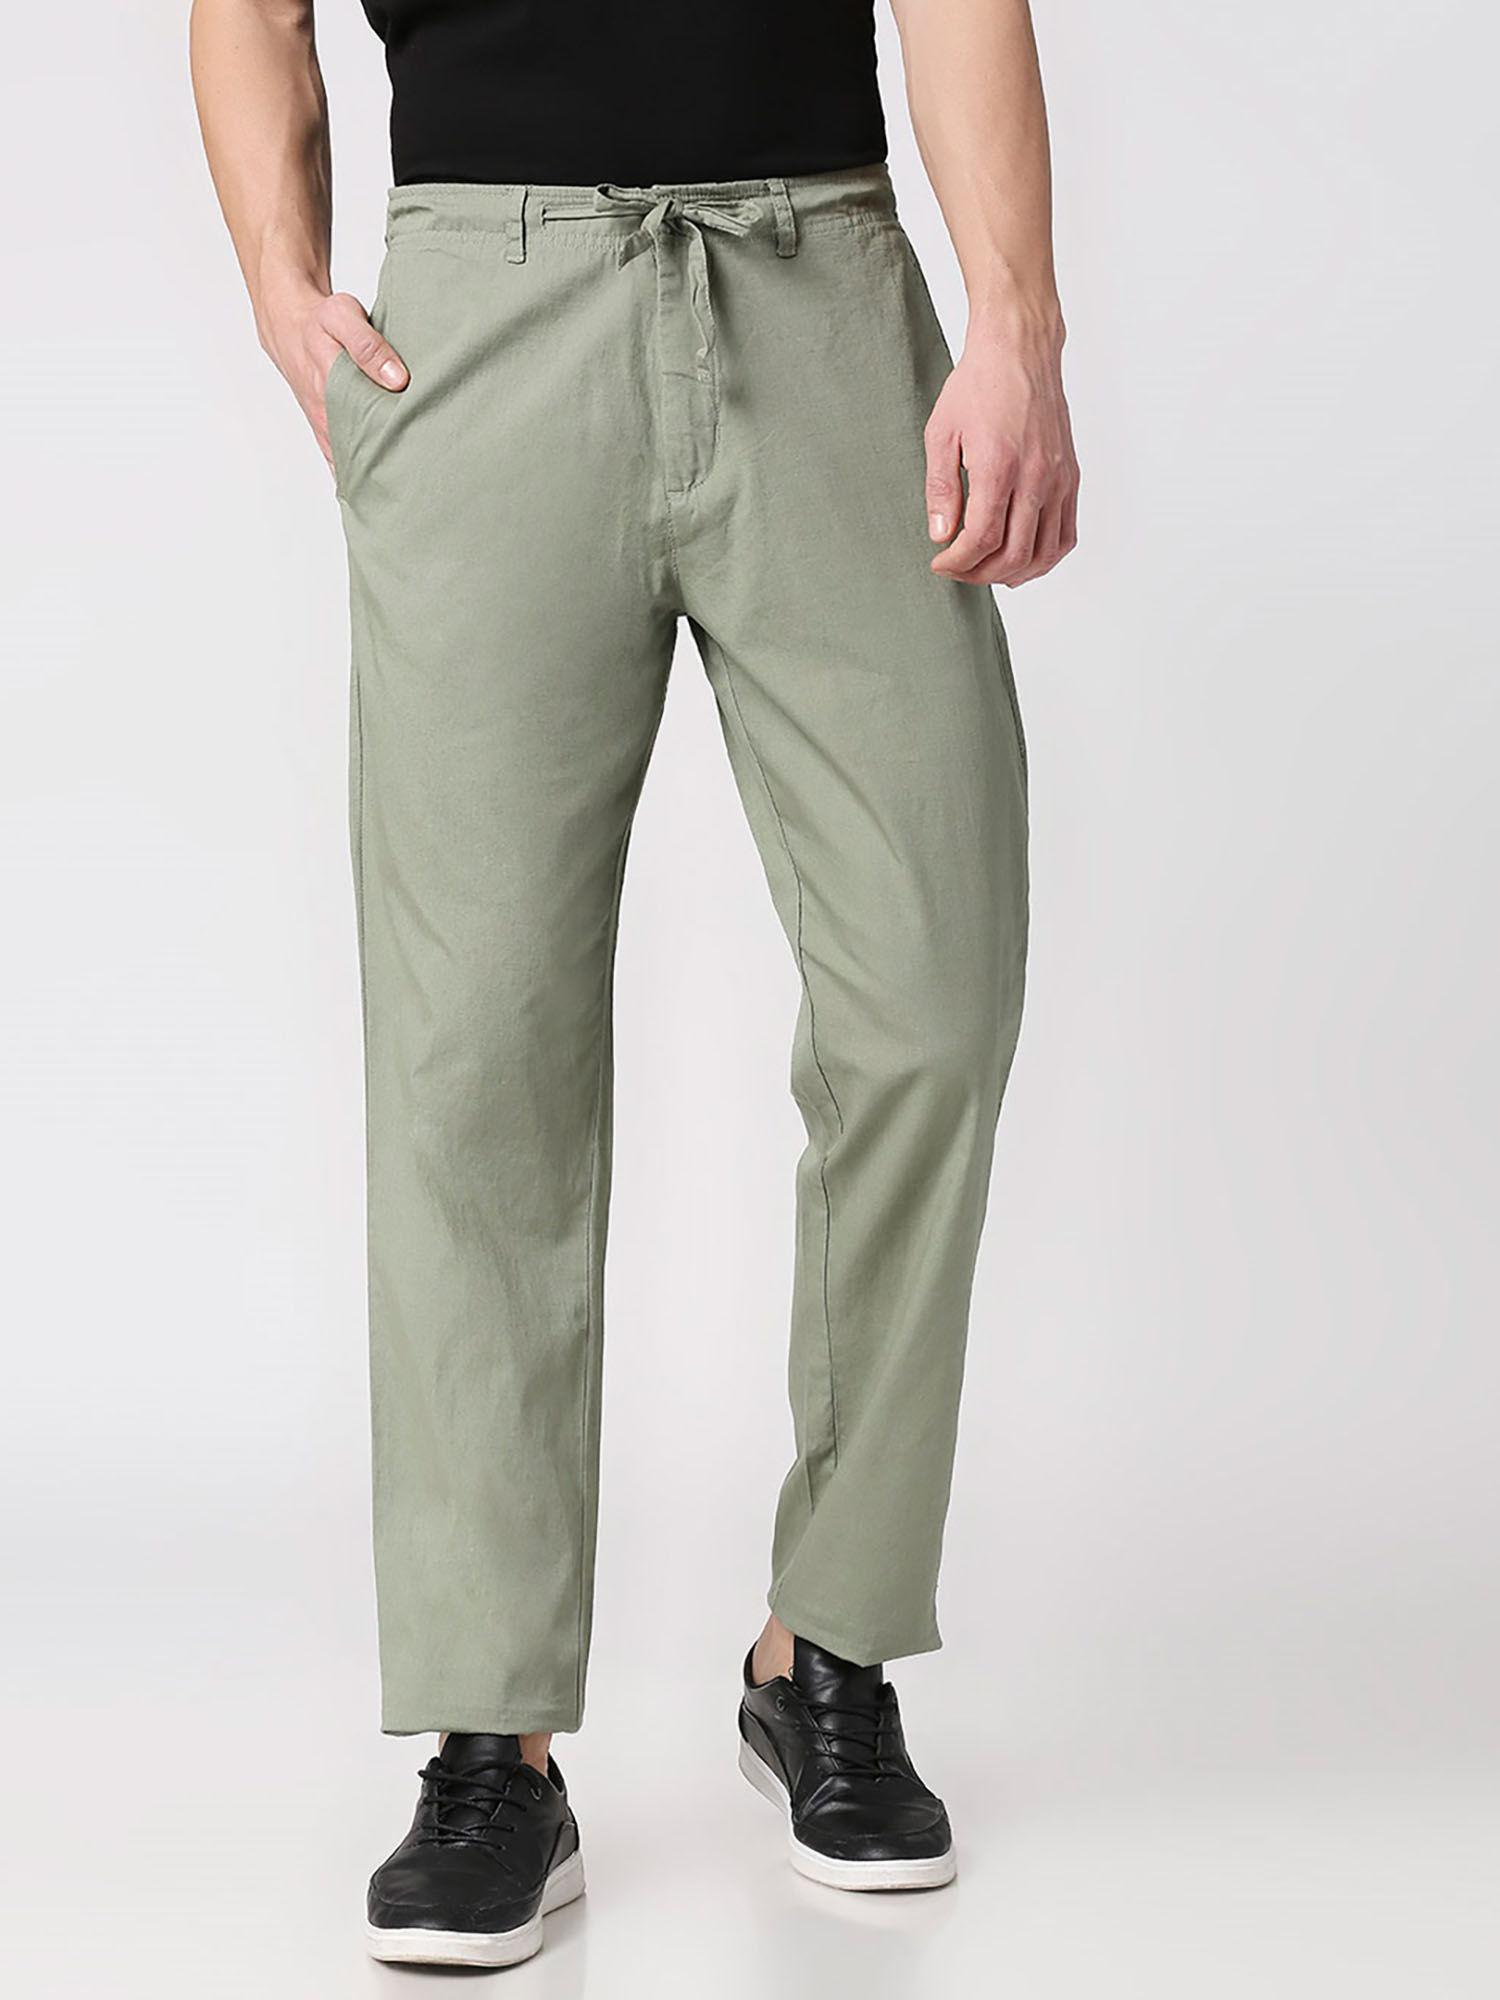 sage green casual cotton trouser